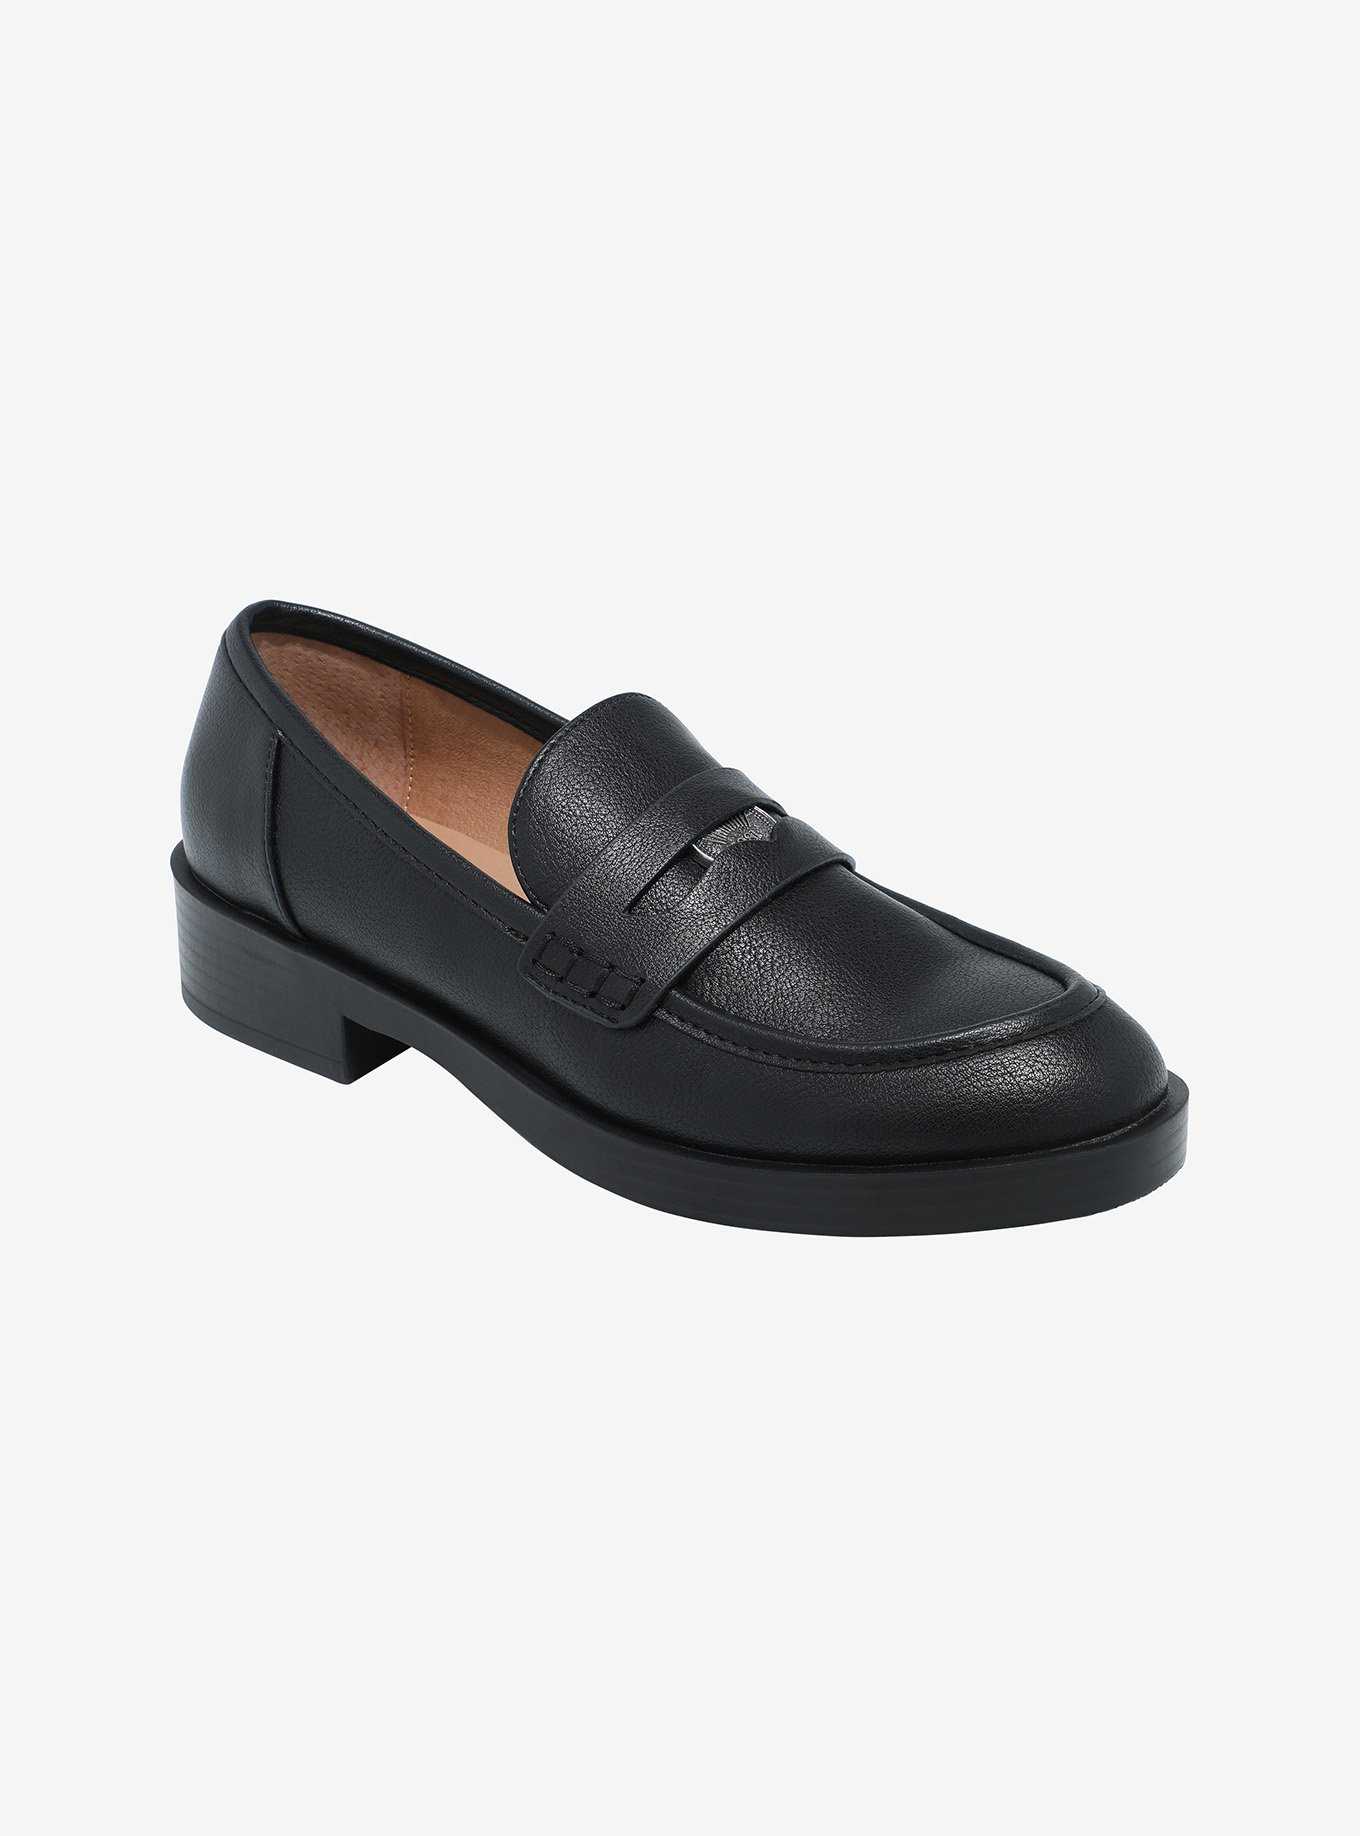 Chinese Laundry Chain Loafer Mules, , hi-res